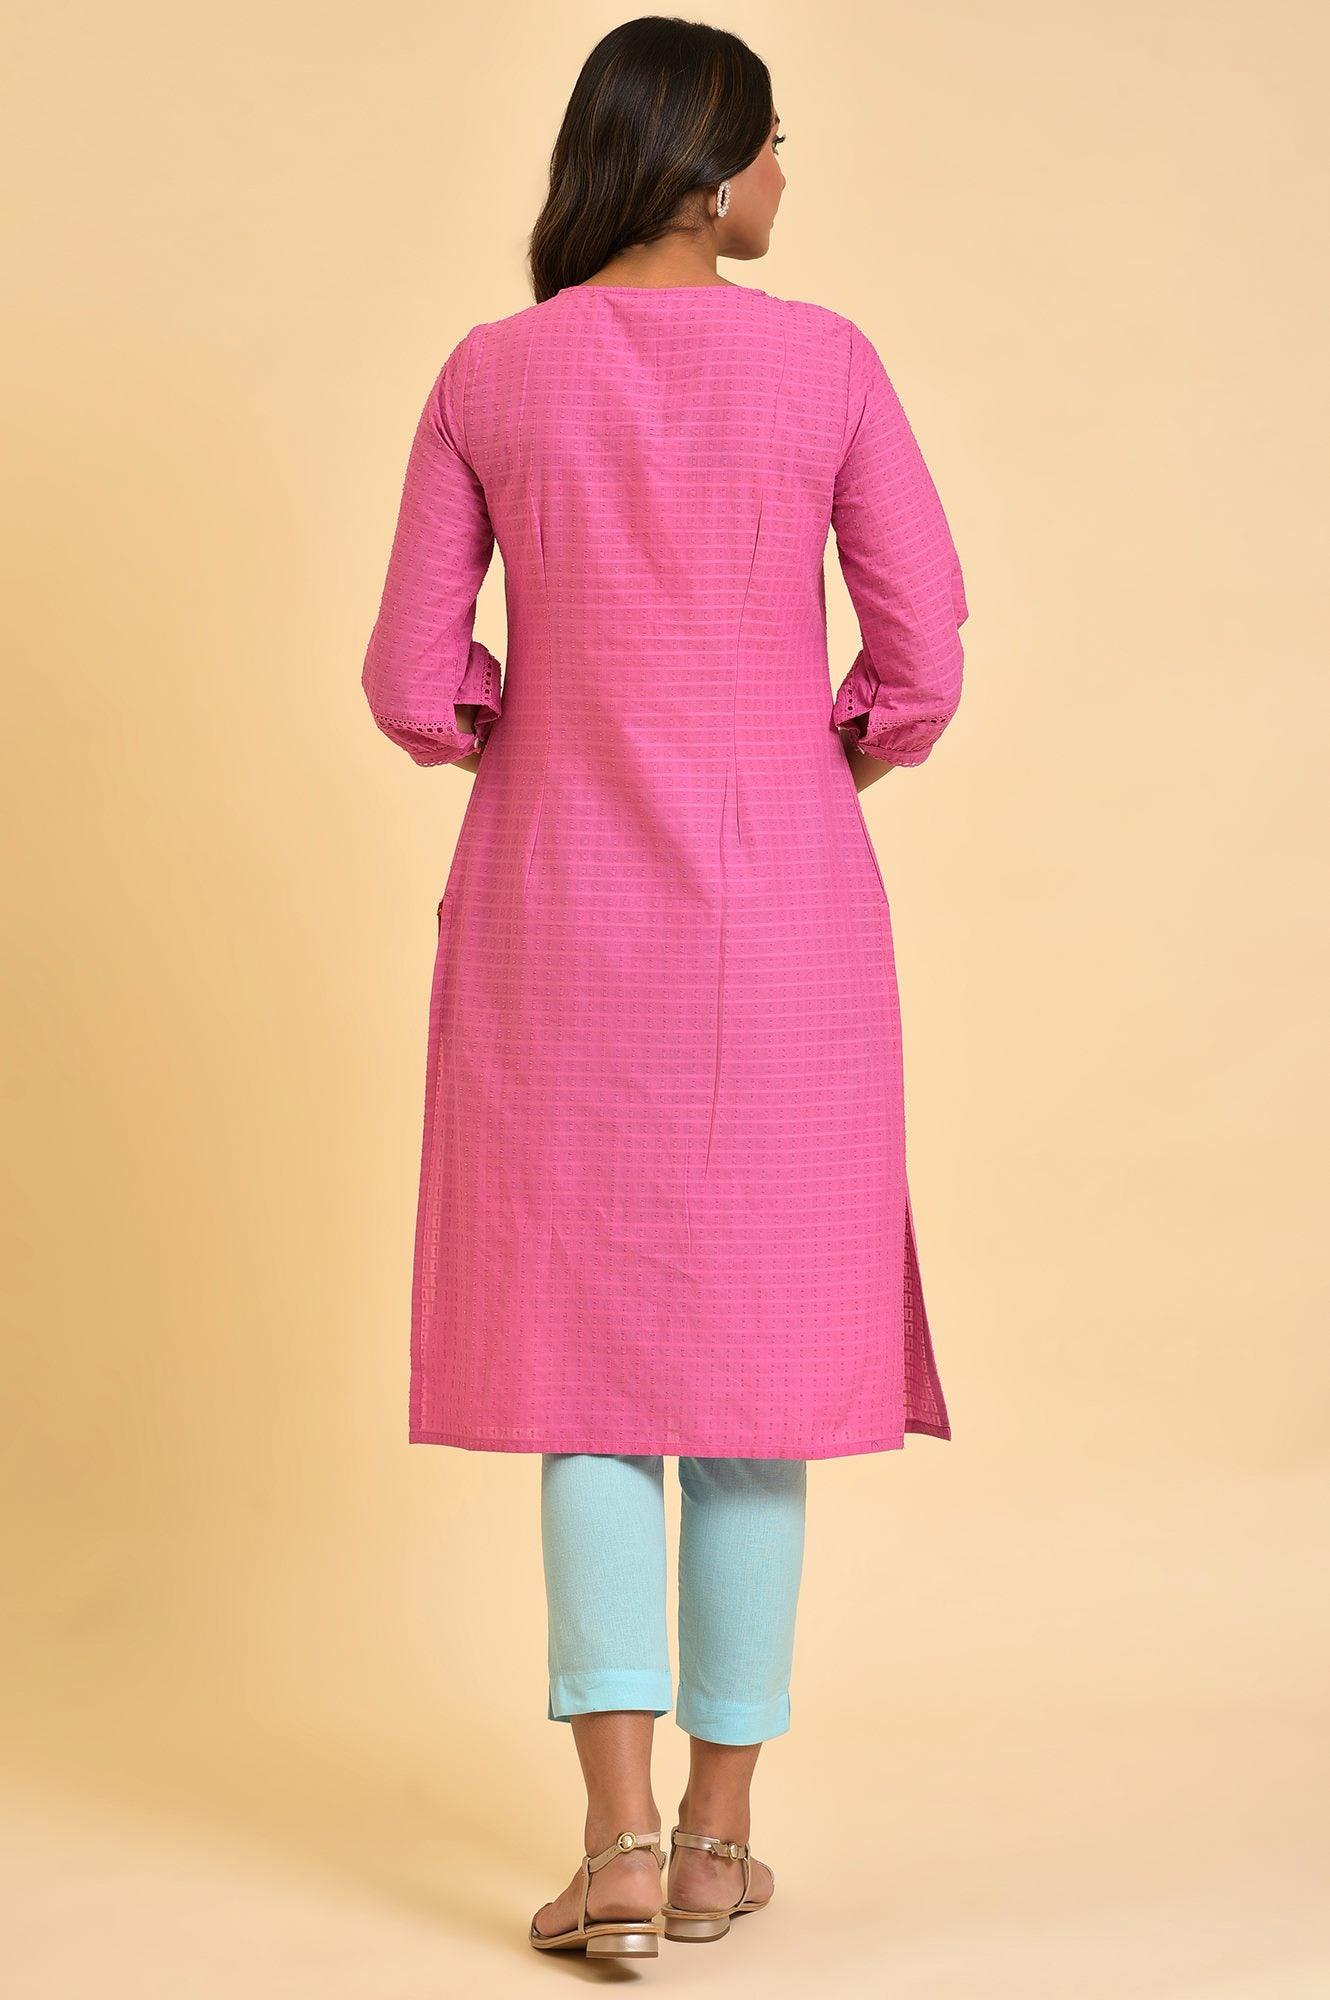 Pink Floral Embroidered kurta In Textured Fabric - wforwoman